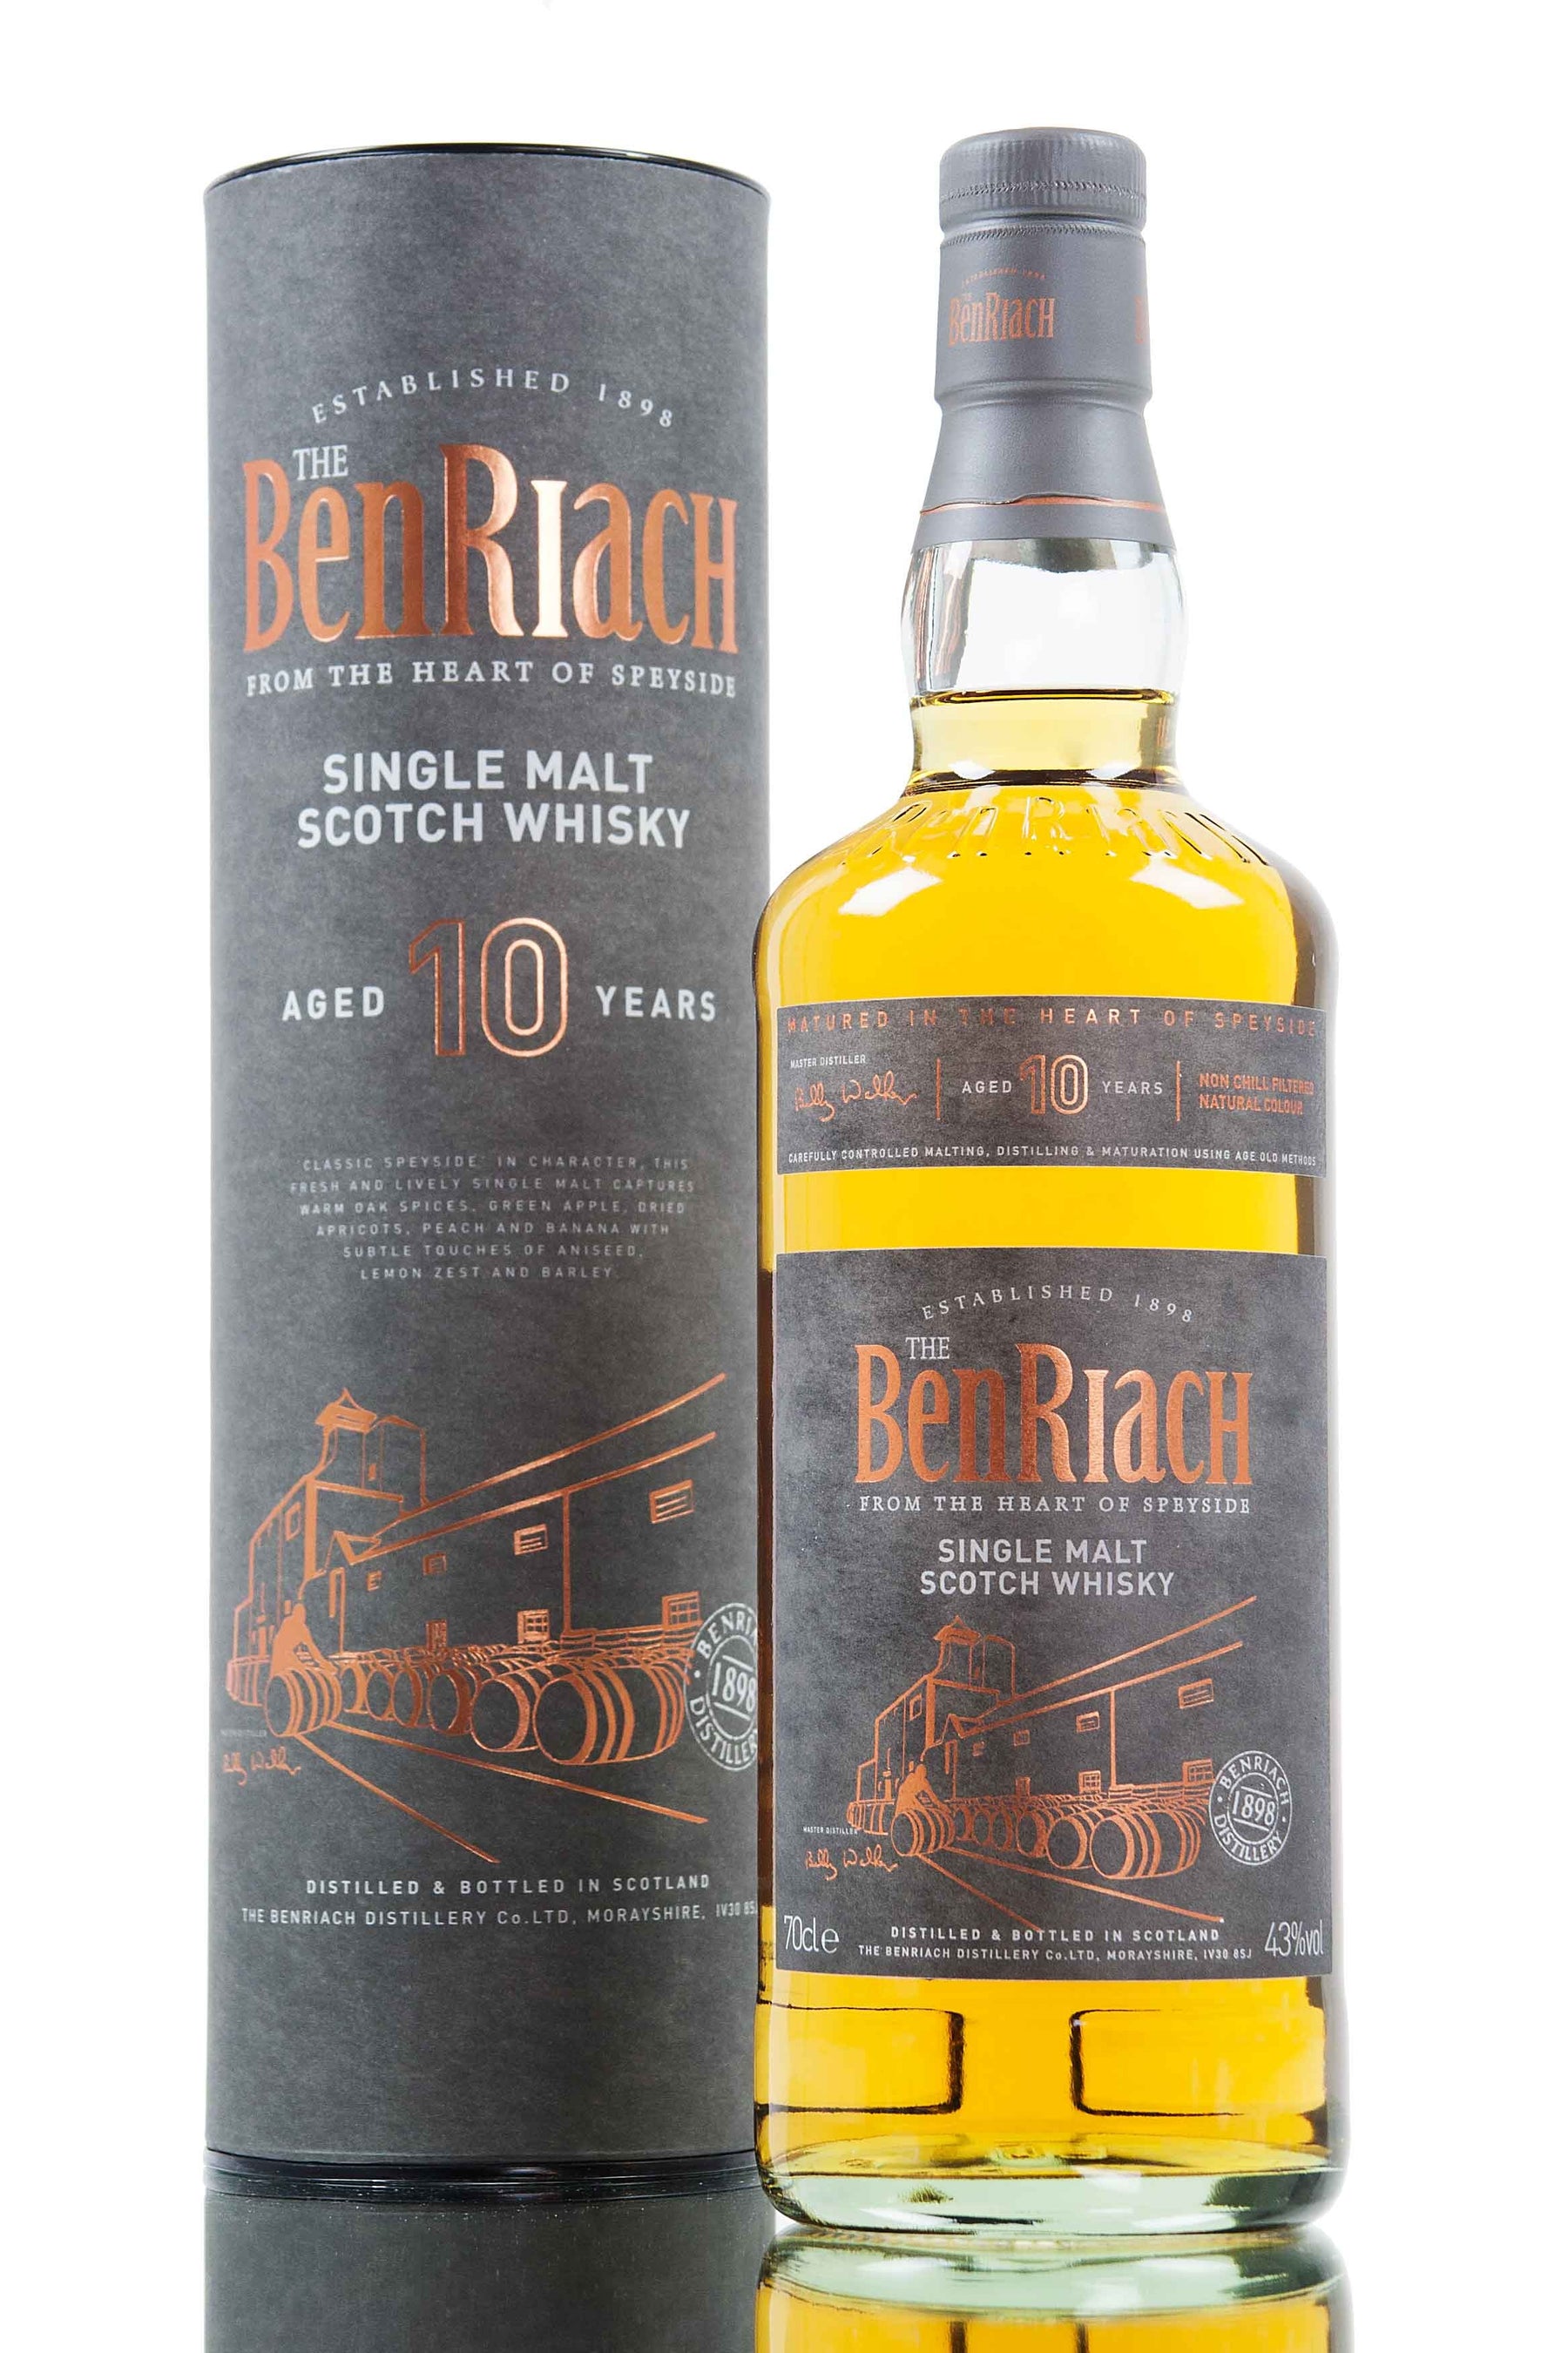 Caption contest - Win a bottle of BenRiach whisky